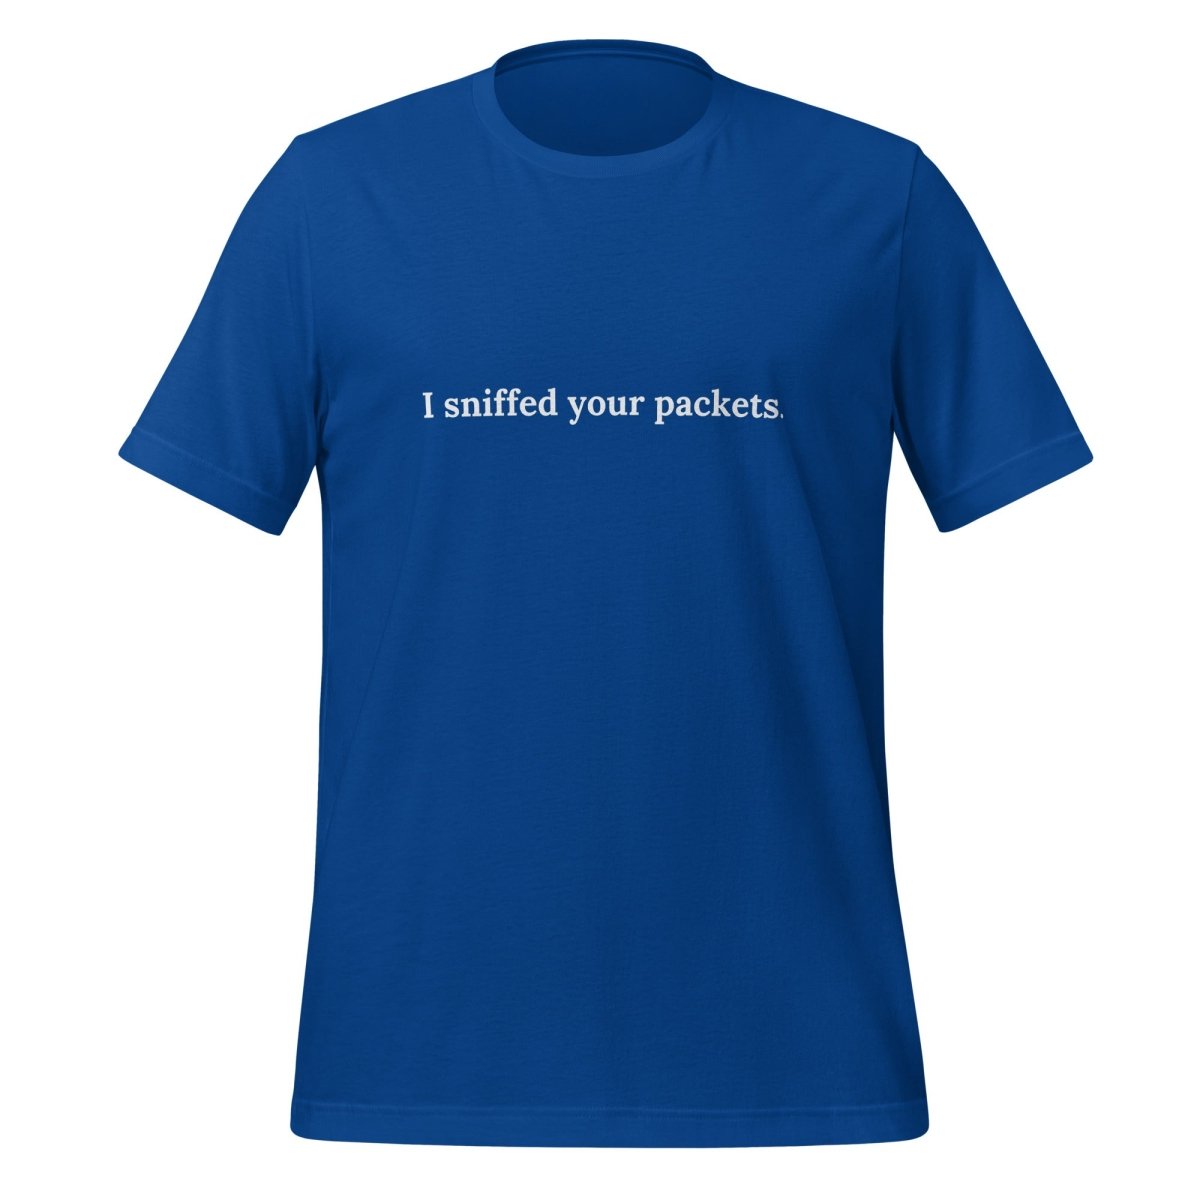 I Sniffed Your Packets T - Shirt (unisex) - True Royal - AI Store